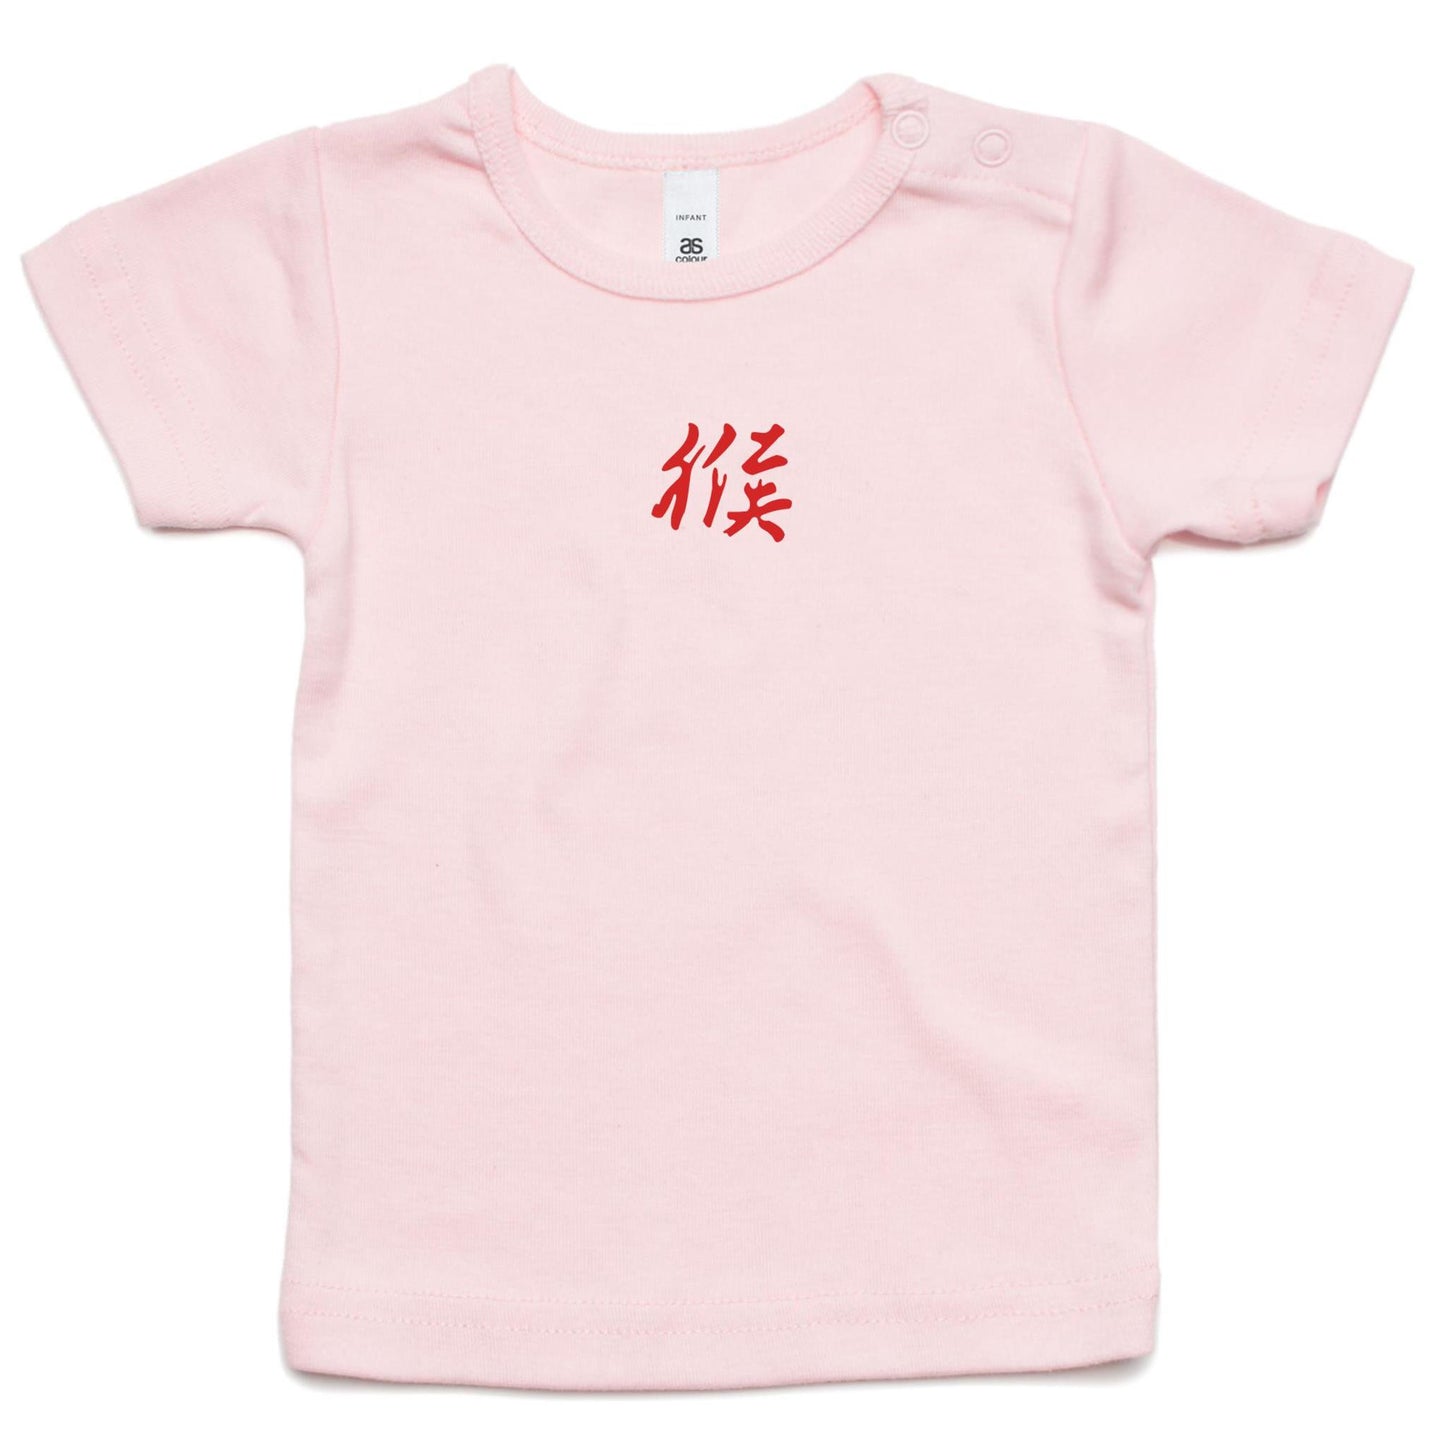 Year of the Monkey T Shirts for Babies